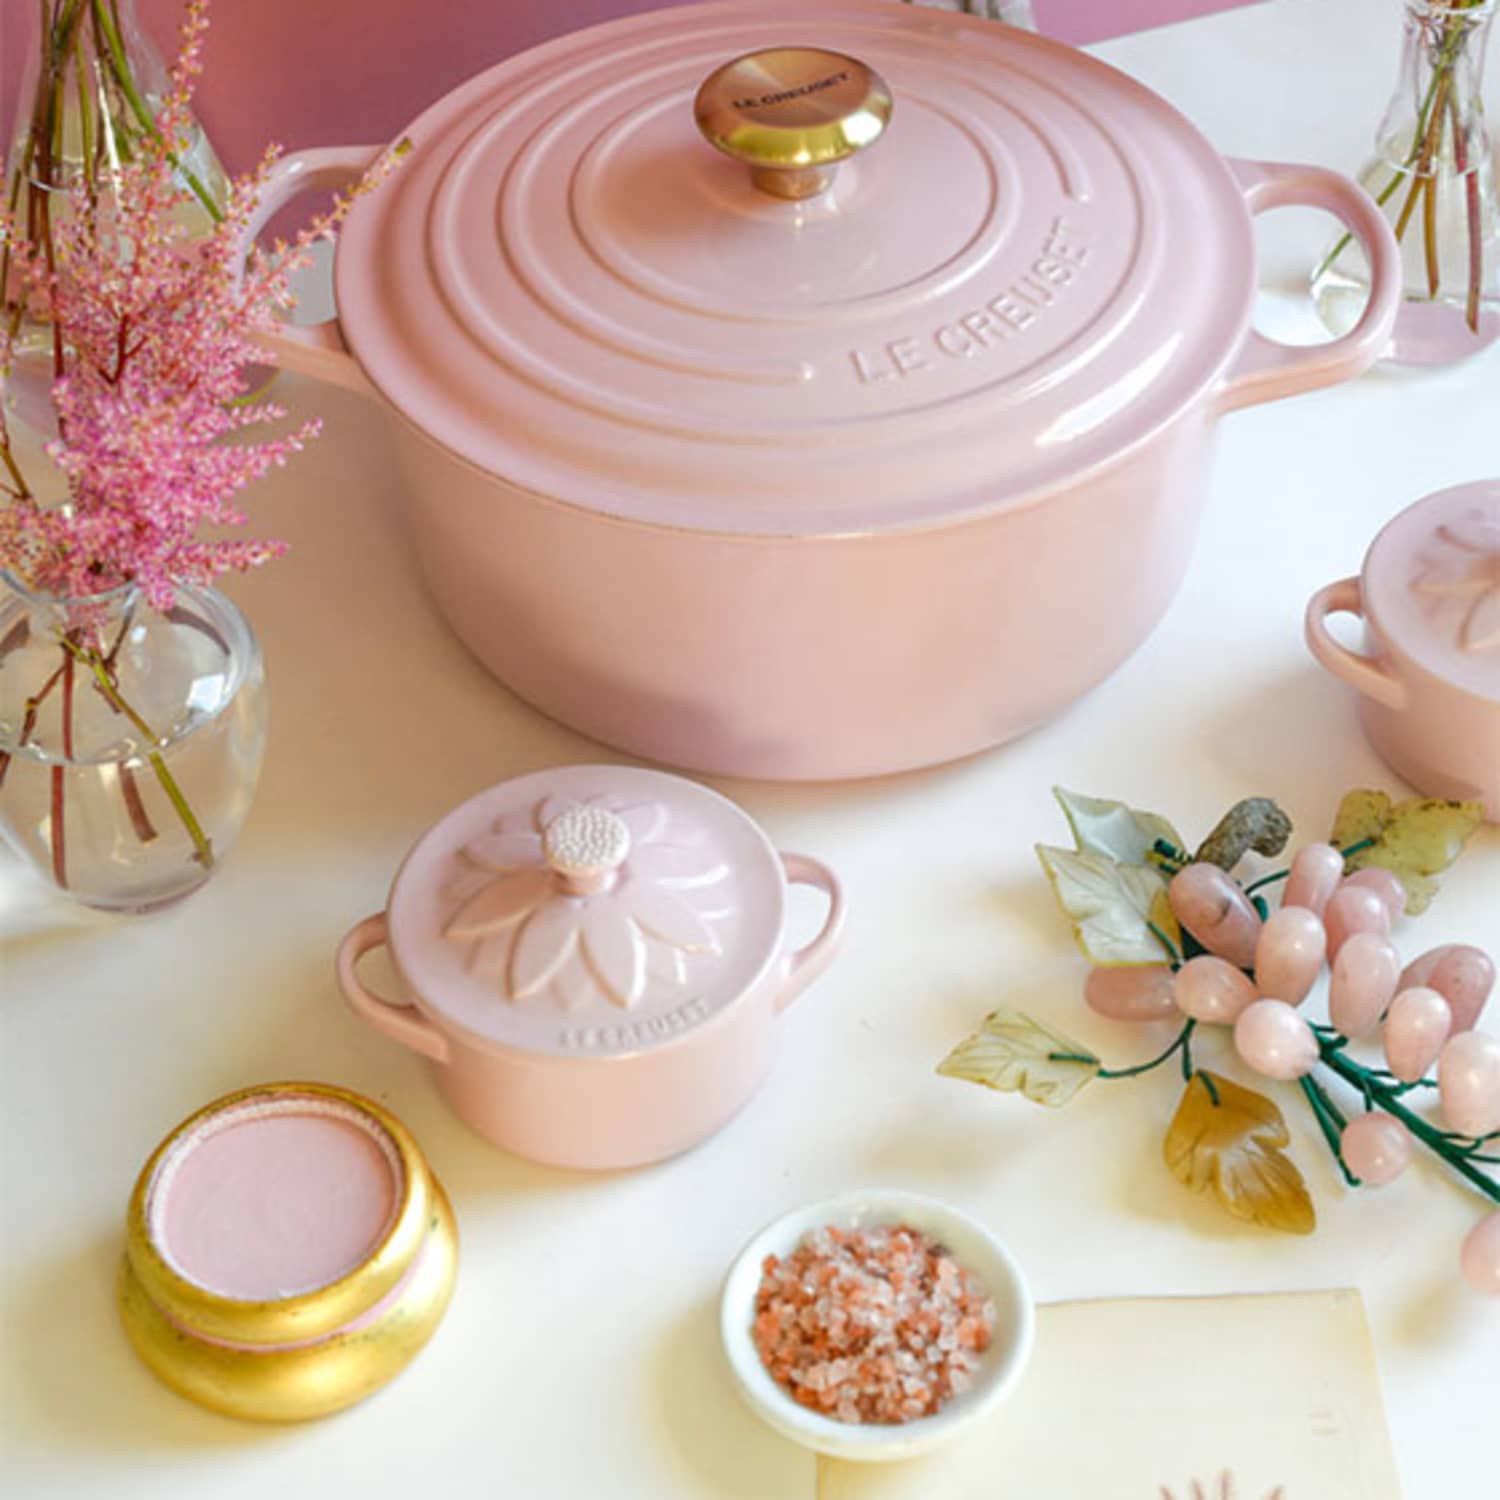 Williams Sonoma Just Discounted Tons of Le Creuset, Staub and More Big  Brands Over 50% Off